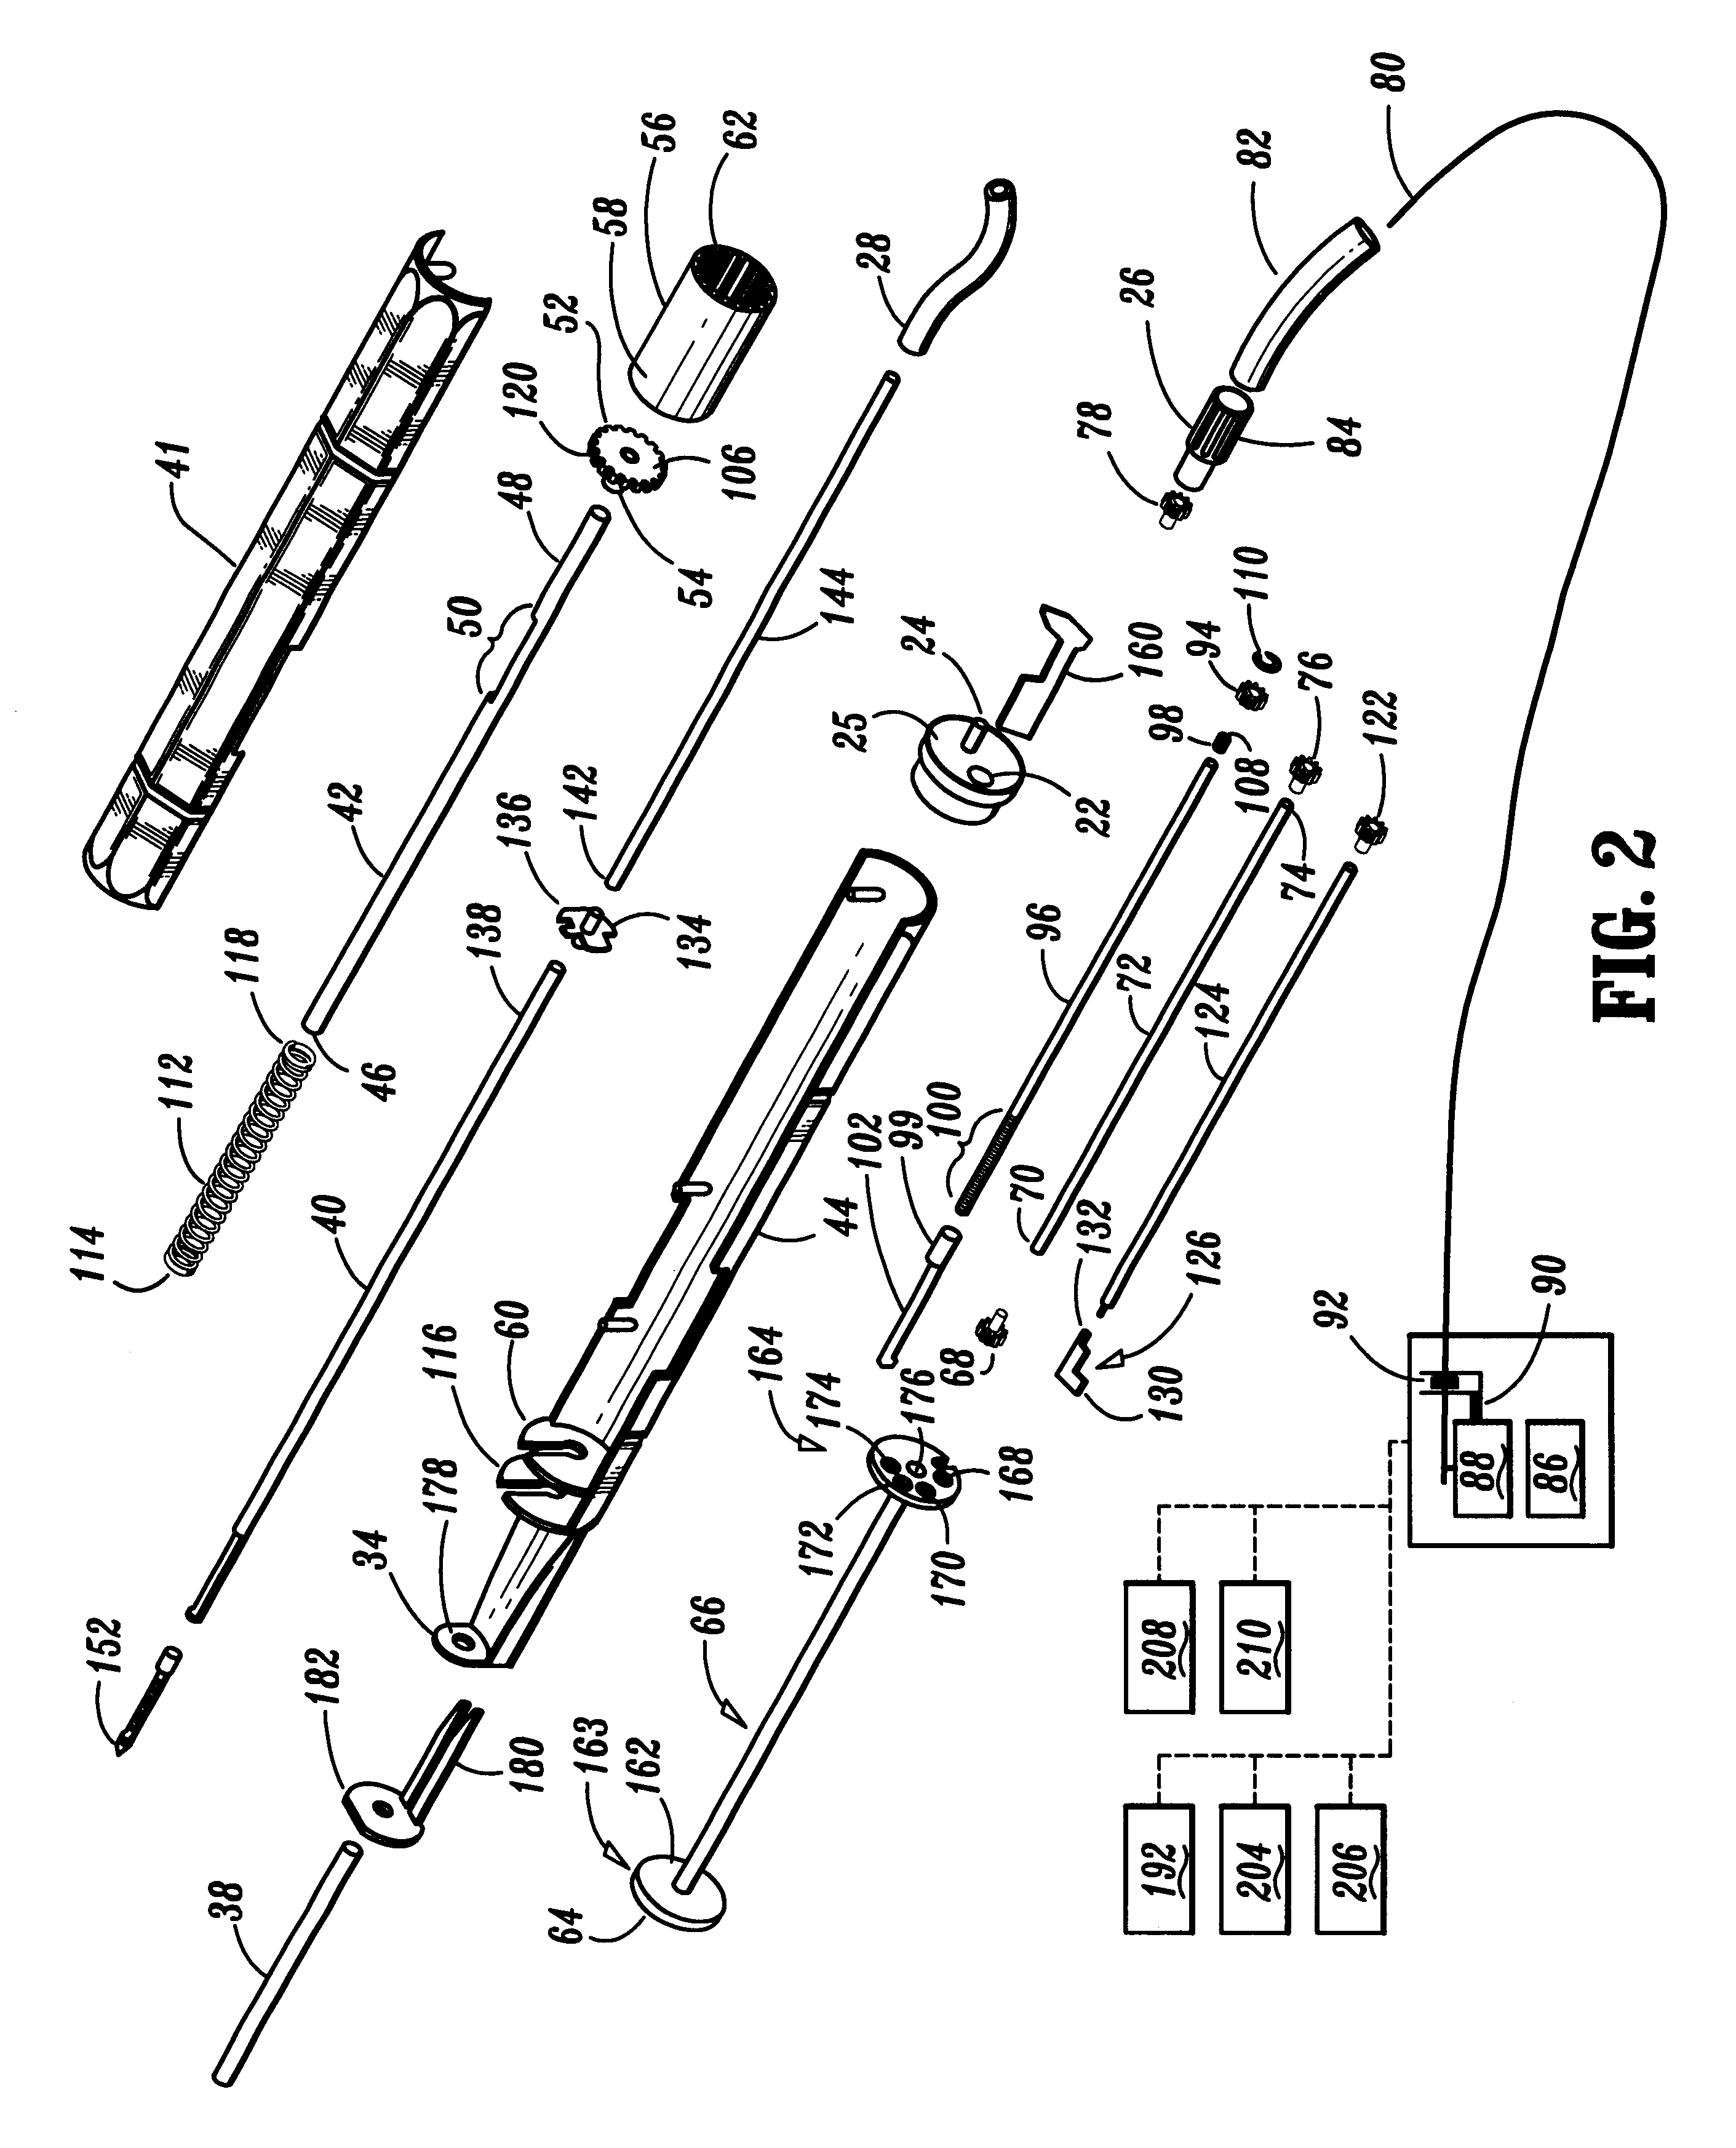 Tissue sampling and removal apparatus and method